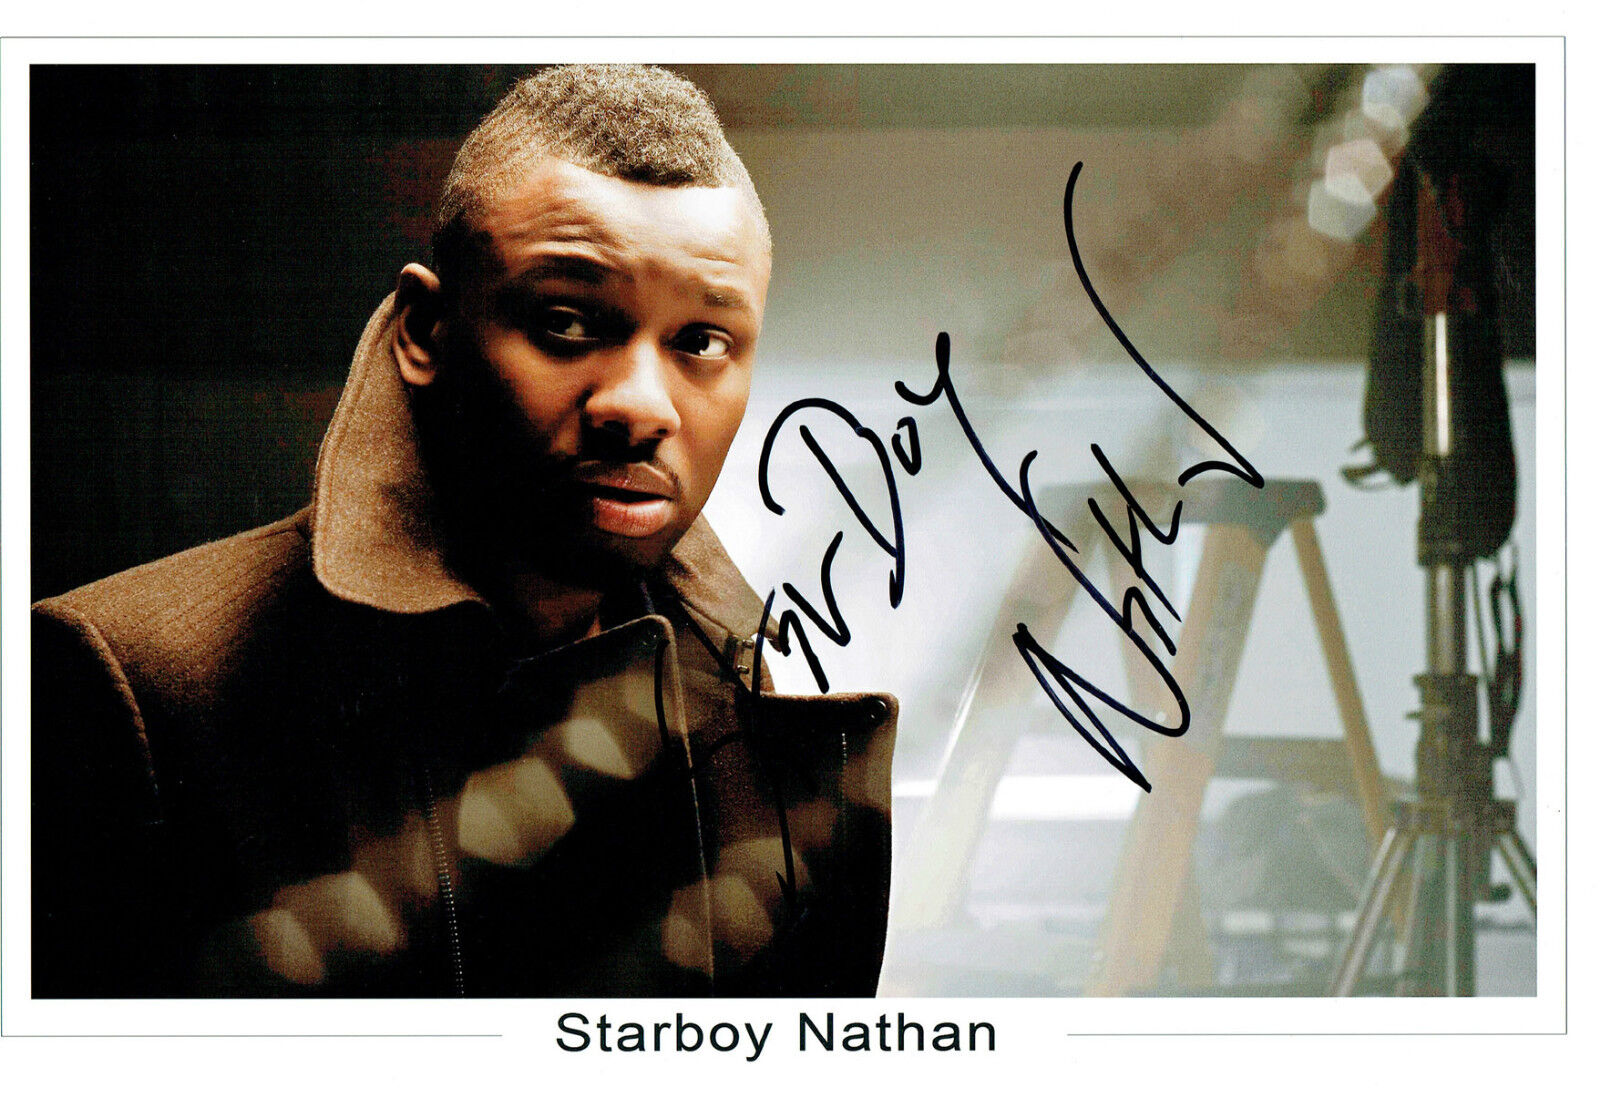 Starboy NATHAN SIGNED Autograph 12x8 Photo Poster painting AFTAL Diamonds Come into my Room